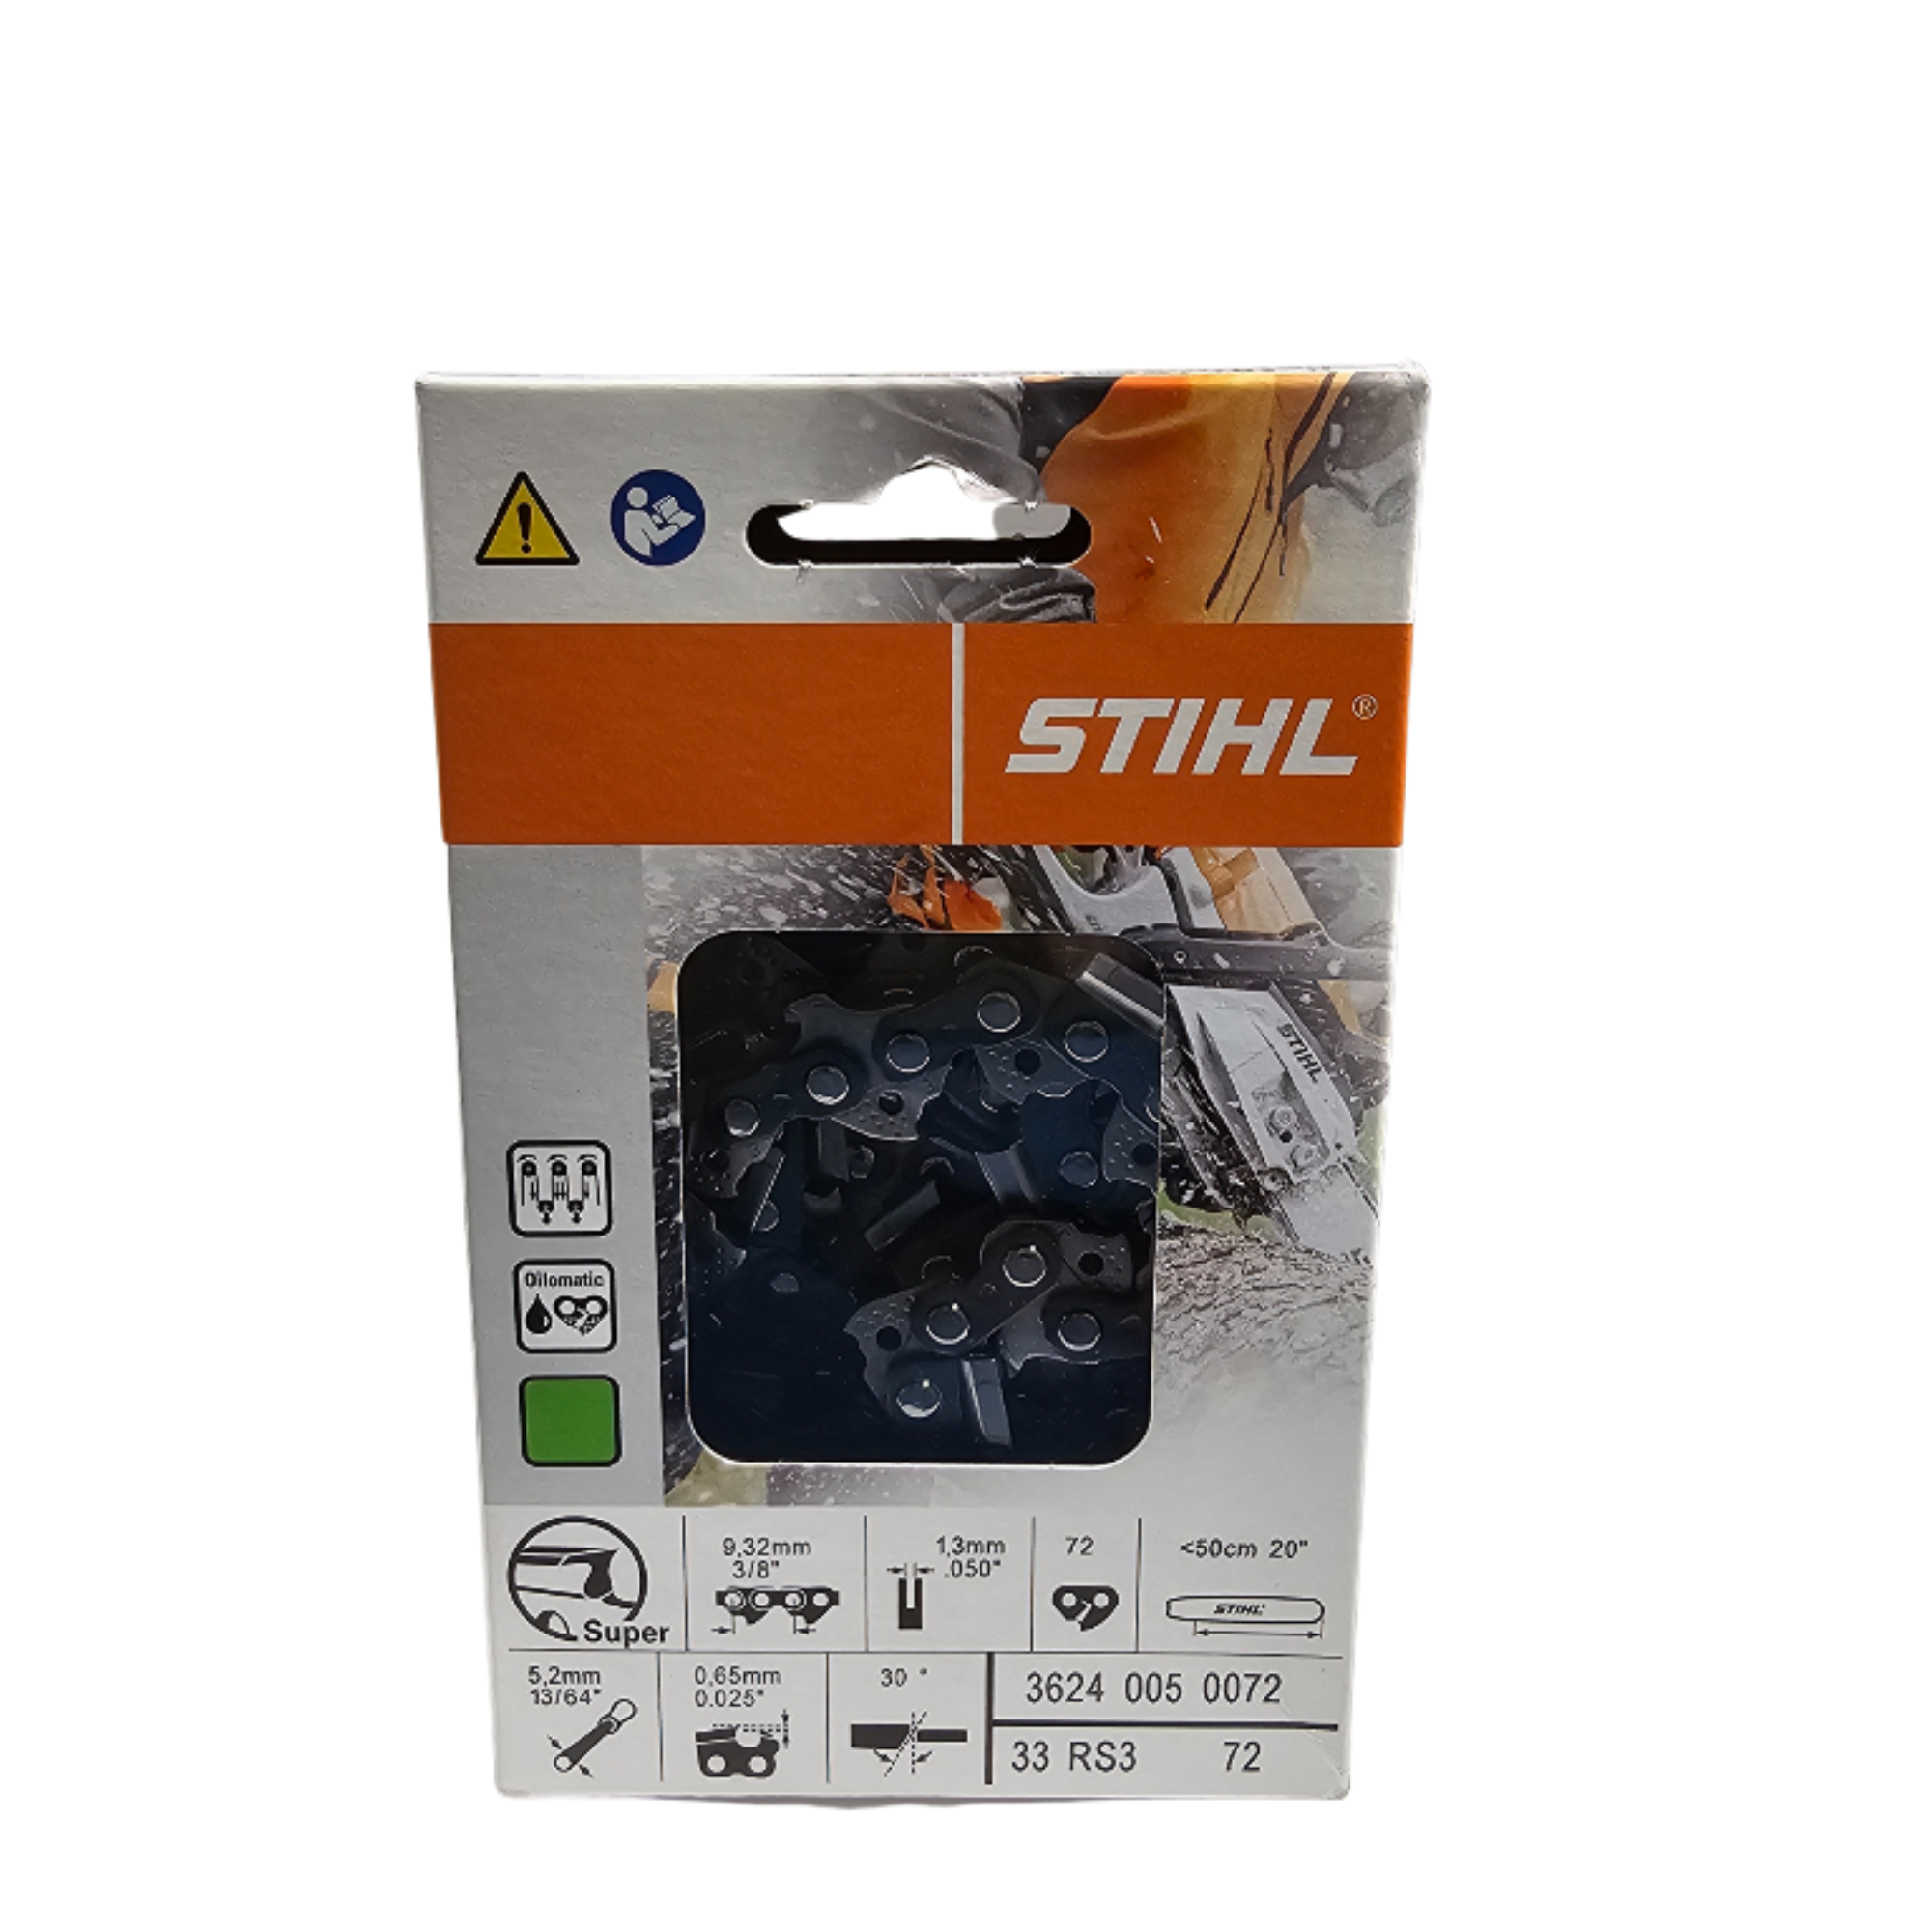 STIHL Oilomatic Rapid Super 3 | 33 RS3 72 | 20 in. | 72 Drive Links | Chainsaw Chain | 3624 005 0072